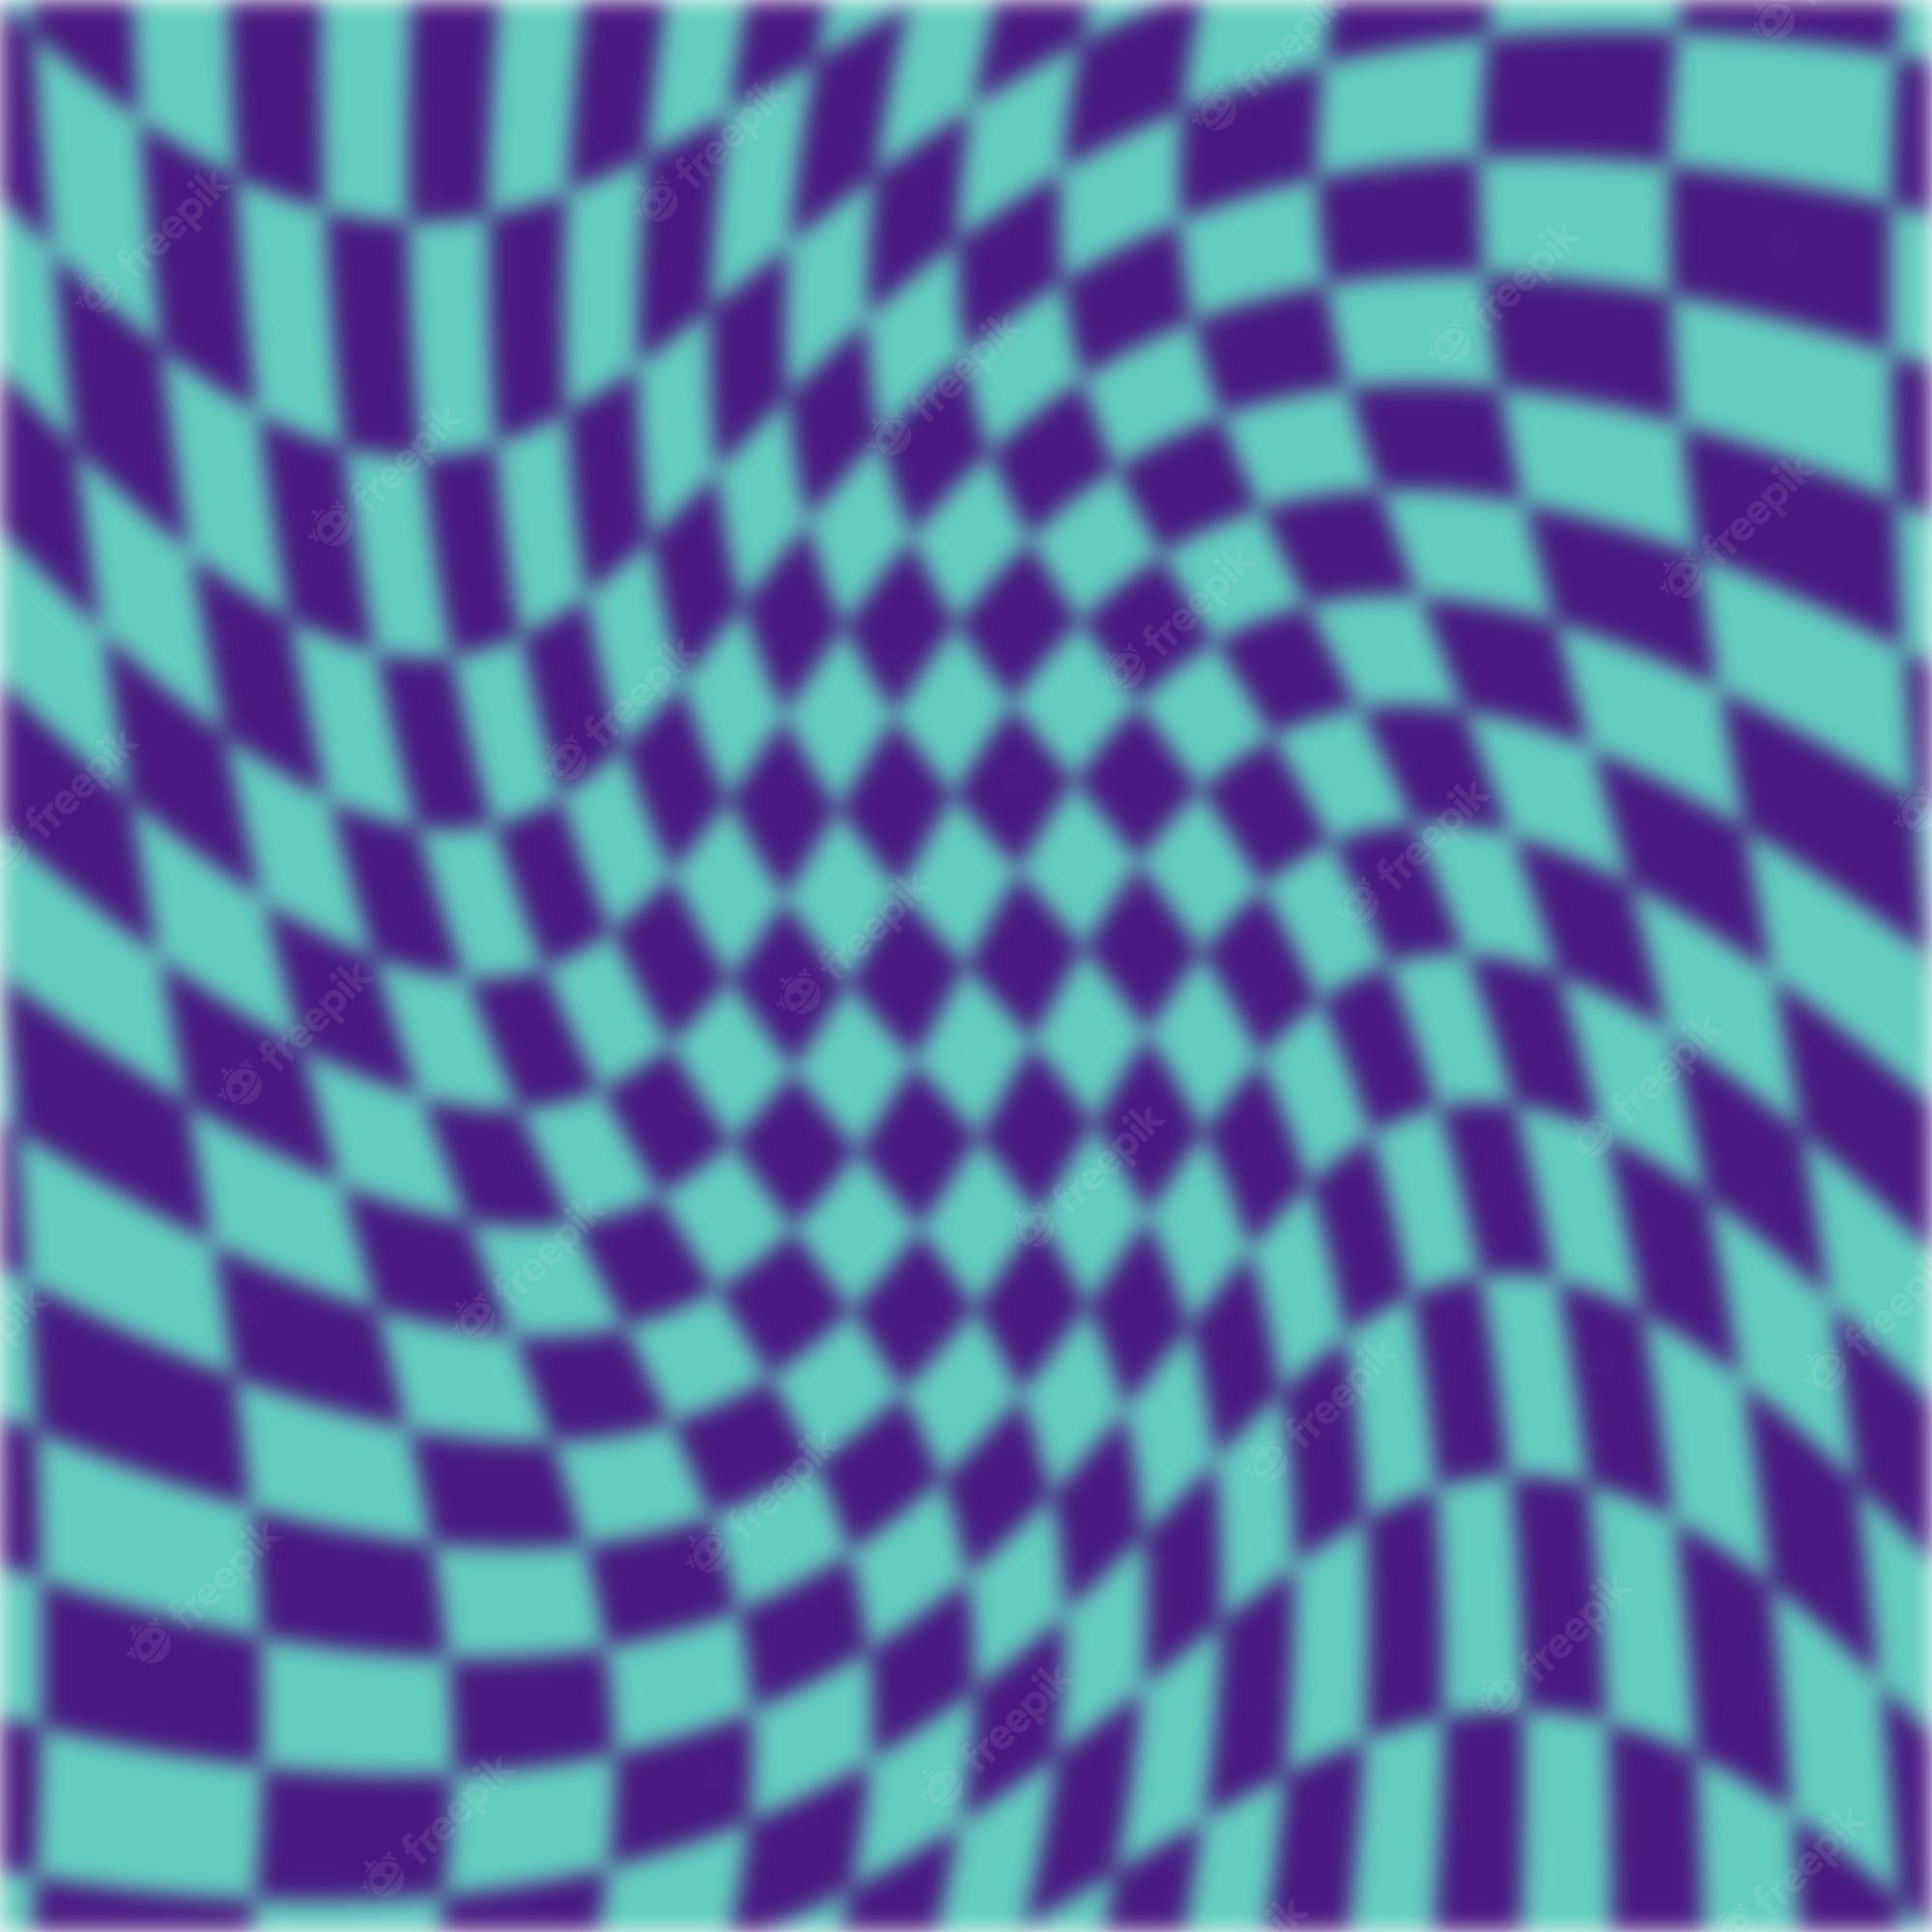 A blue and purple checkered pattern - Webcore